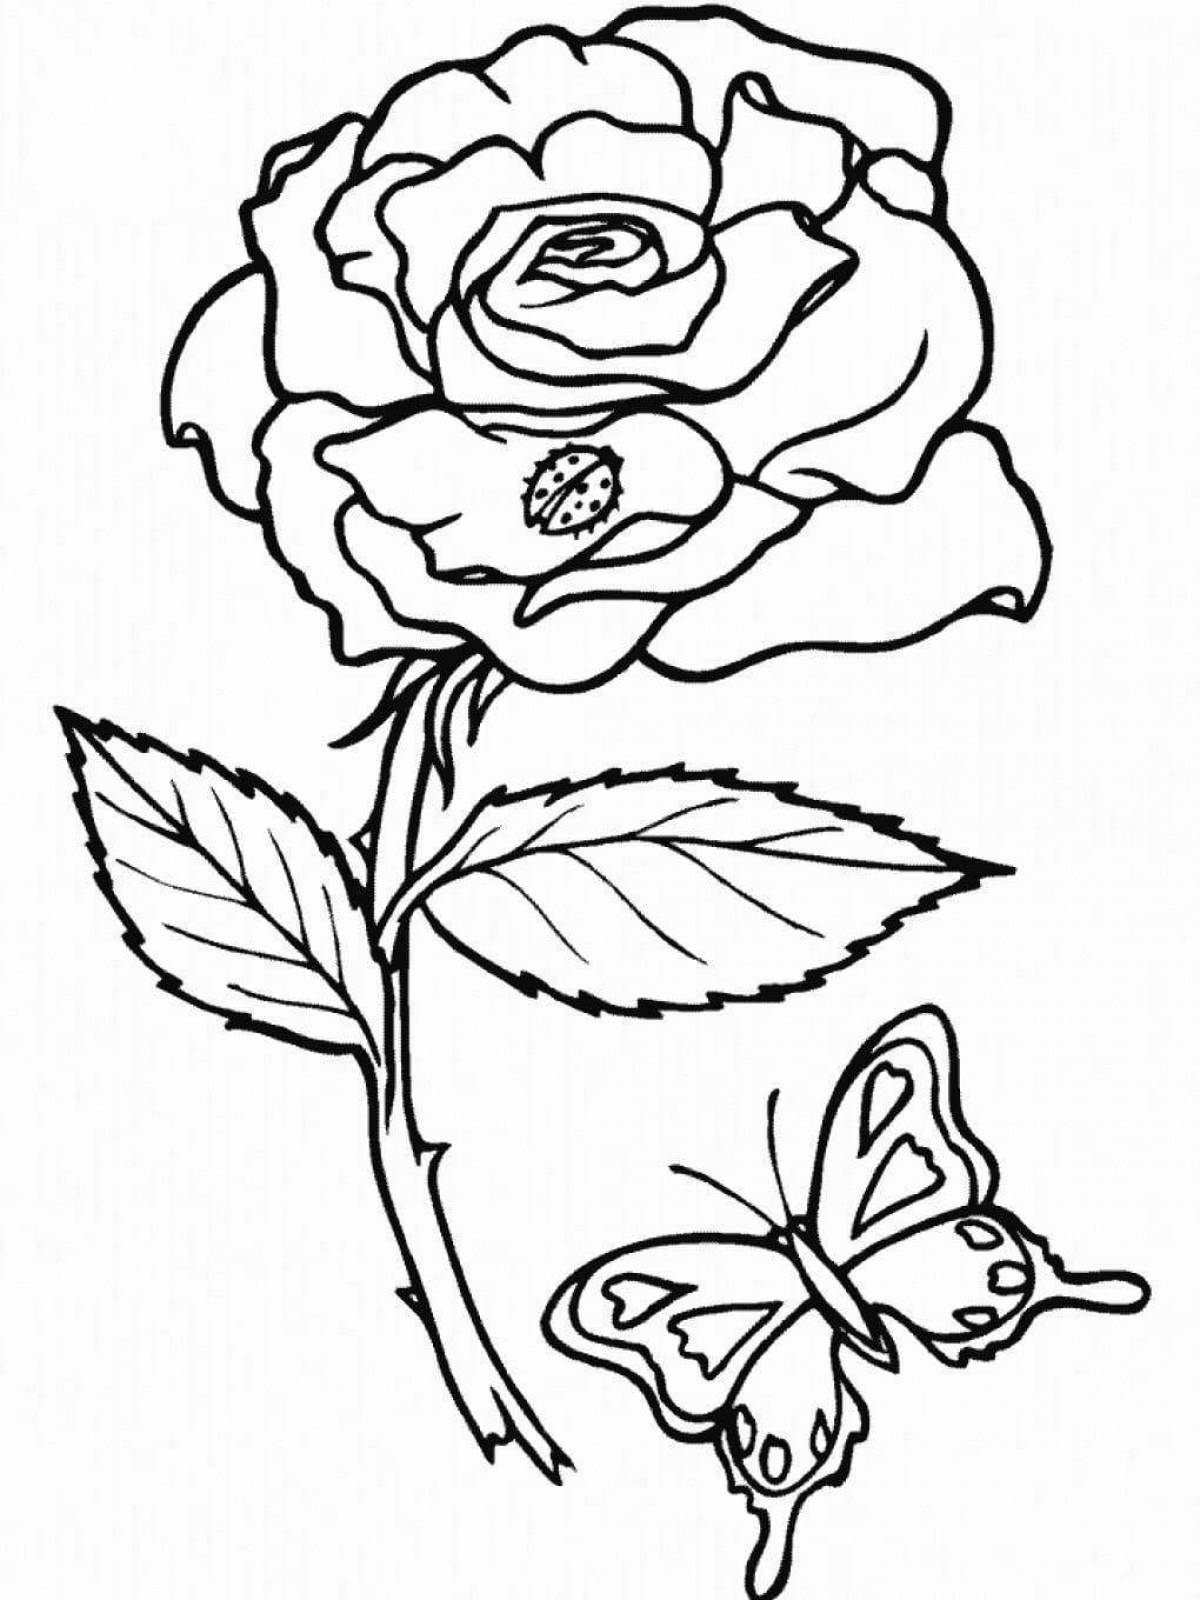 Fun coloring book roses for children 5-6 years old